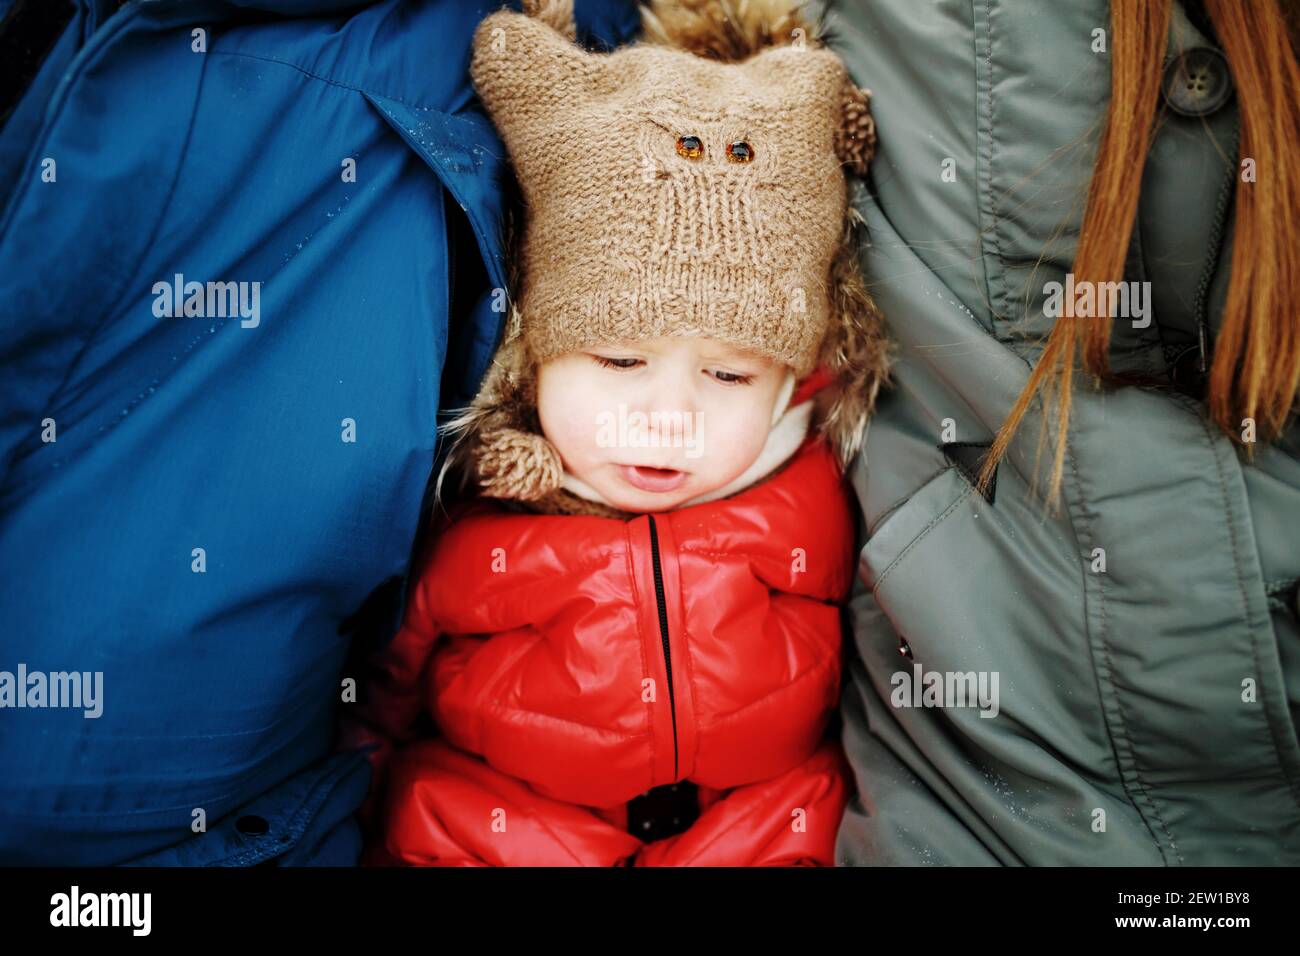 Concept of parental care, portrait of cute unhappy sad little girl in warm outfit sitting between her parents in wintertime Stock Photo